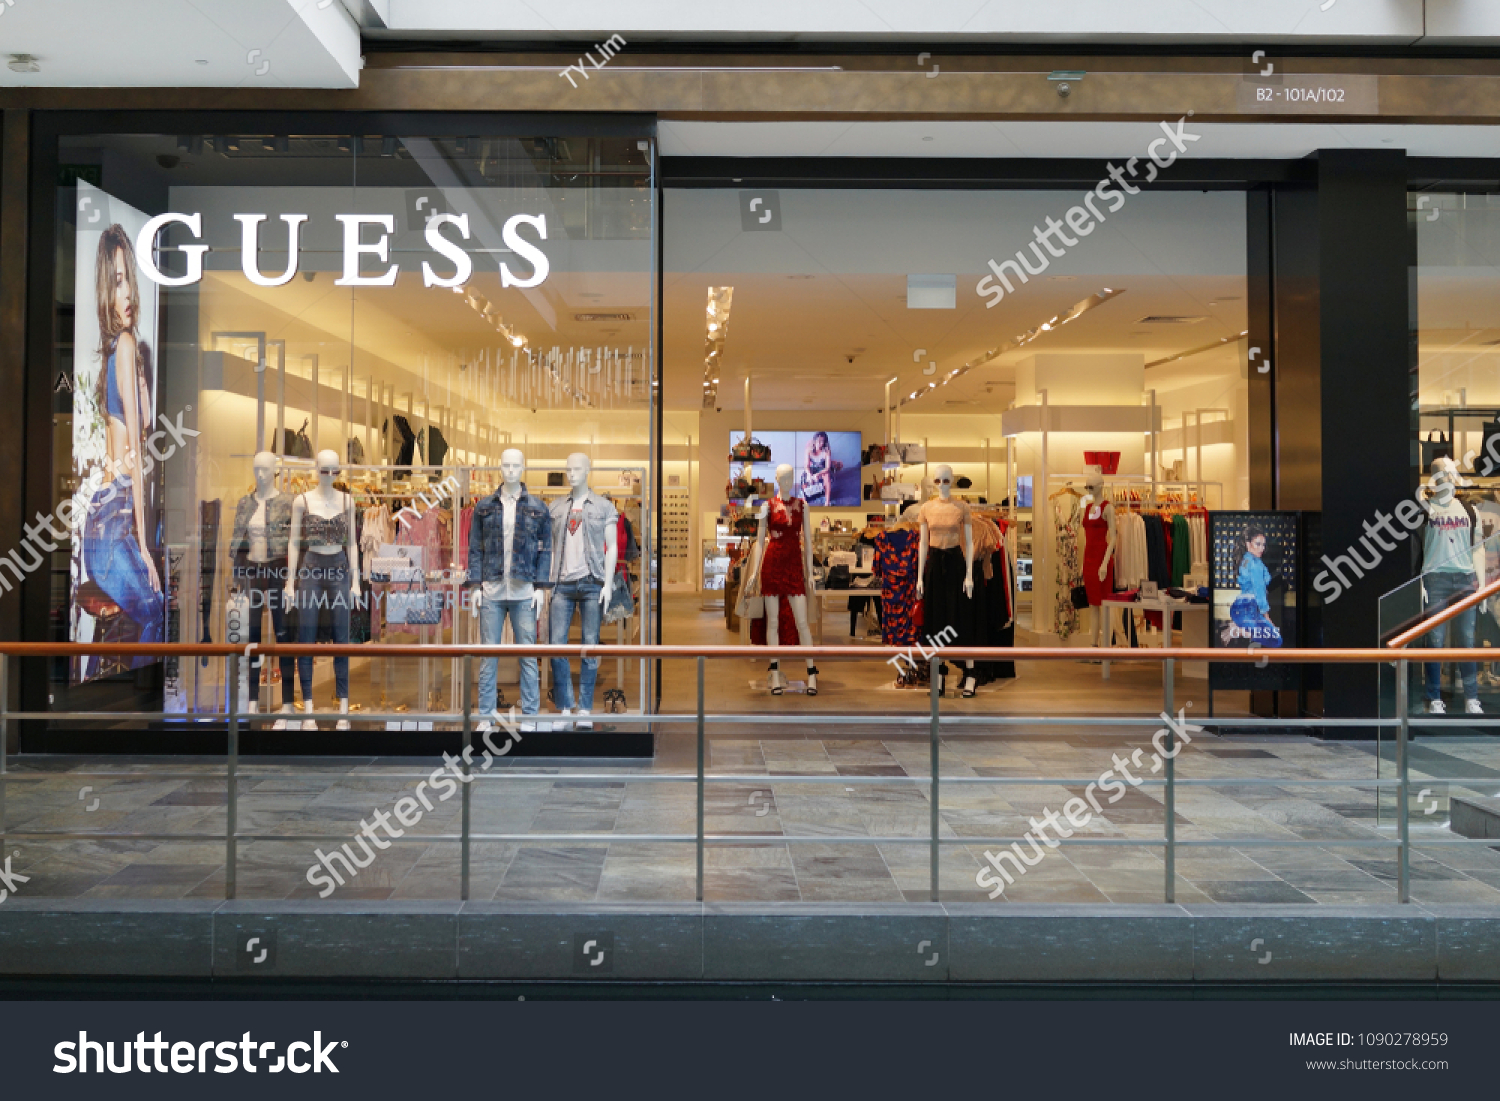 Hotellet Dronning Hysterisk Singapore Apr 22 2018 Guess Store Stock Photo (Edit Now) 1090278959